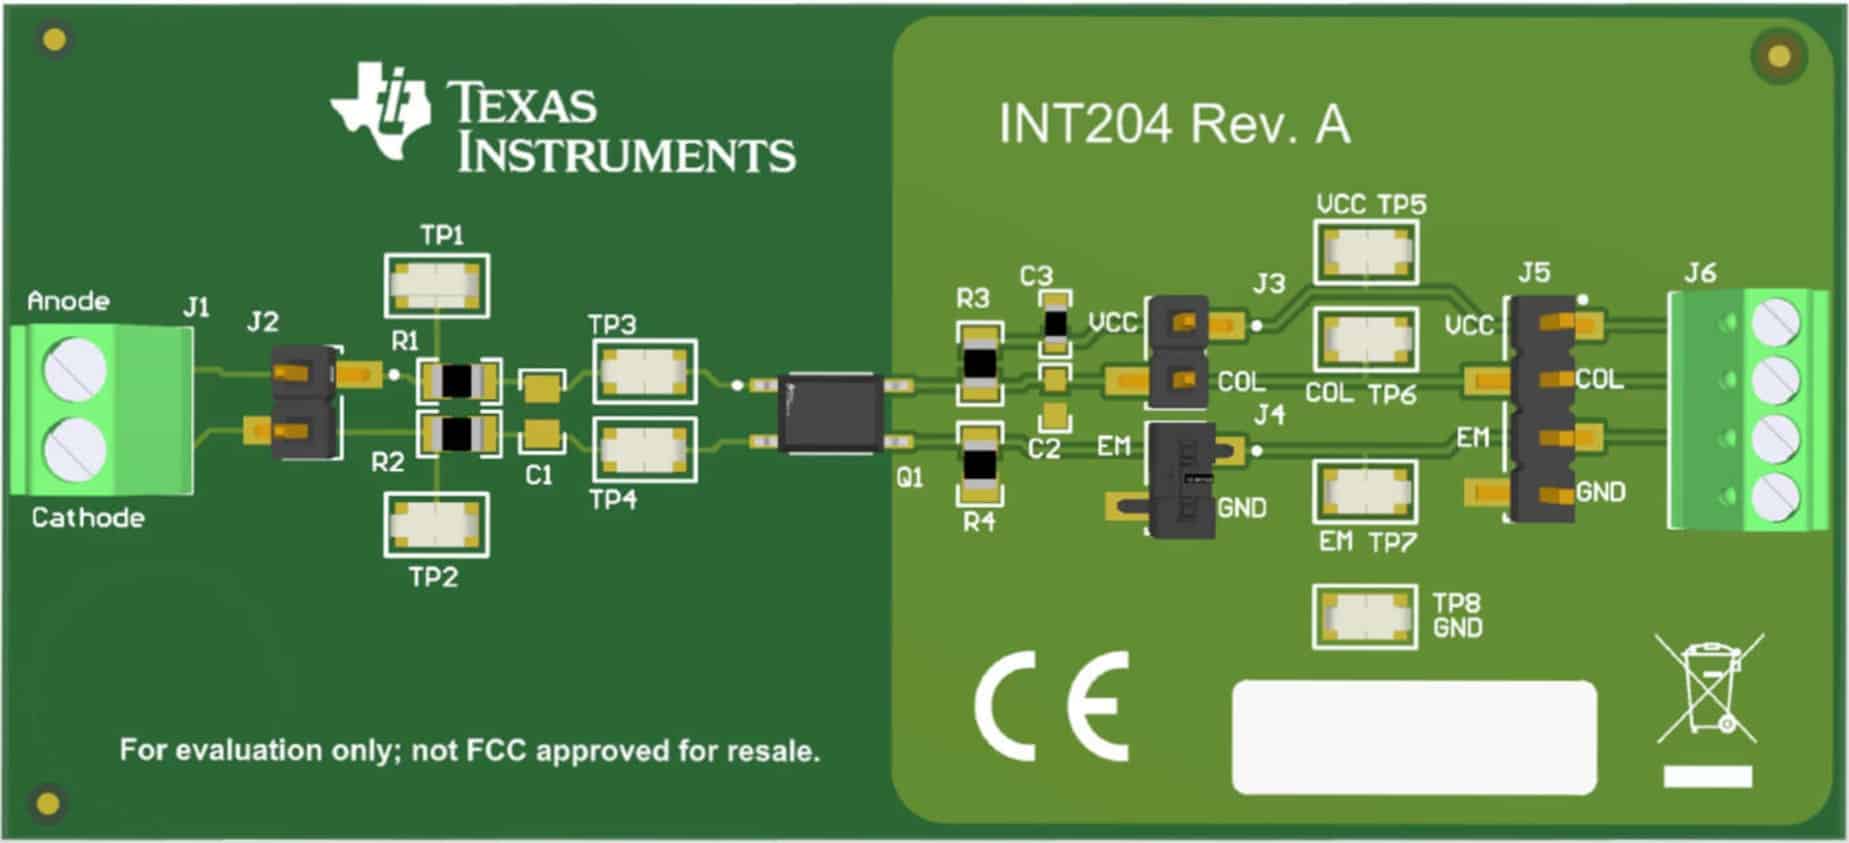 Revealing The Future Of High-Voltage Innovation With Texas Instruments